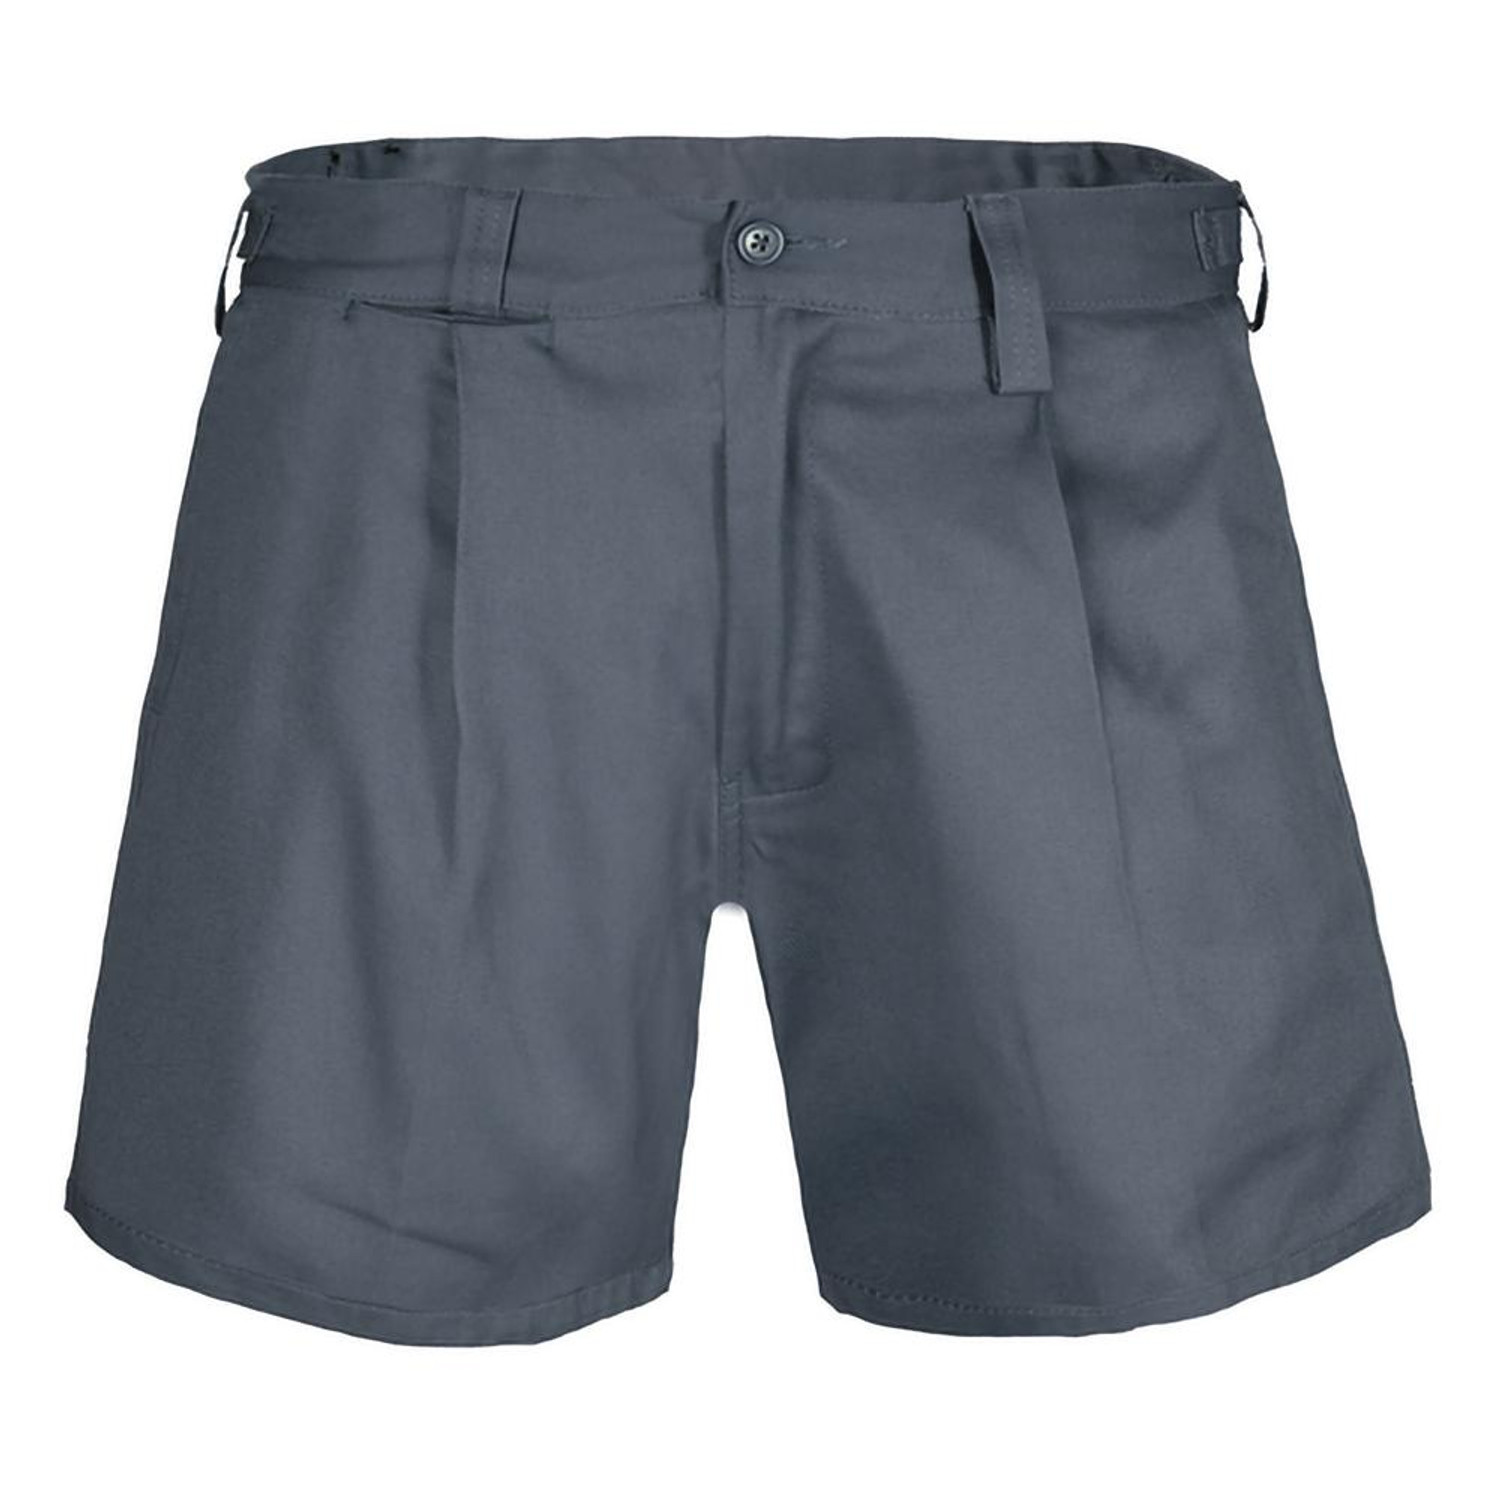 Ritemate RM1002S Mens Belt Loop and Side Tab Combo Shorts in Bottle Bulk Buy Deal, Buy 4 or more RM1002S Shorts for dollar54.95 Each